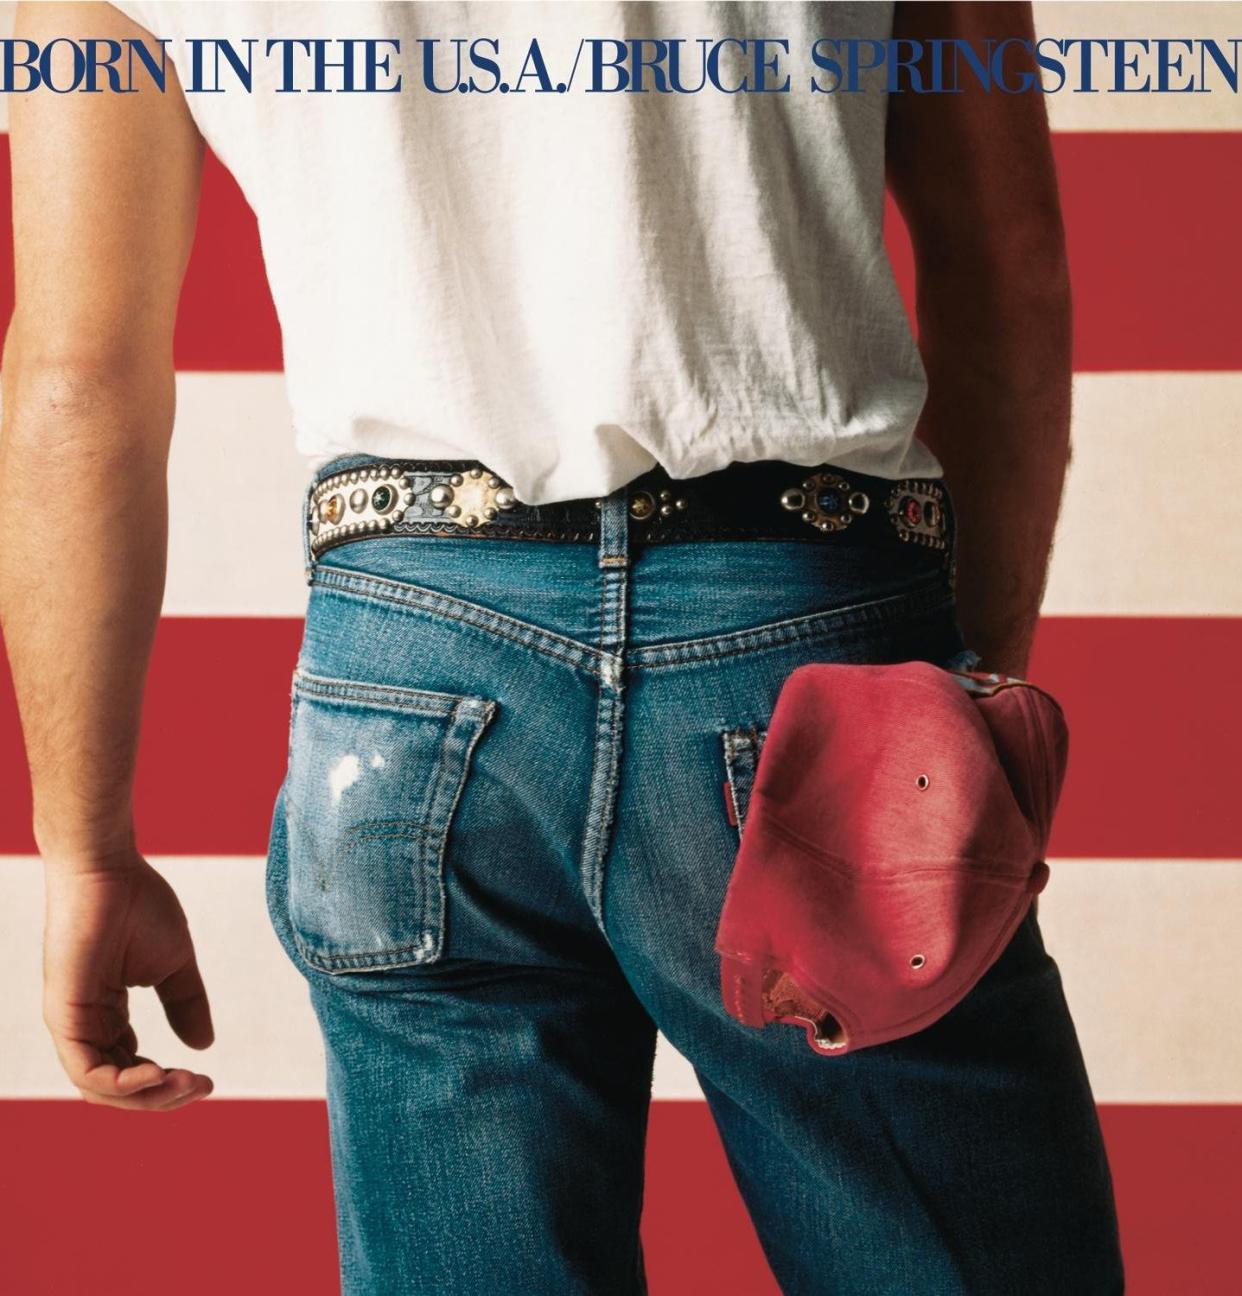 Springsteen Releases ‘Born in the USA’